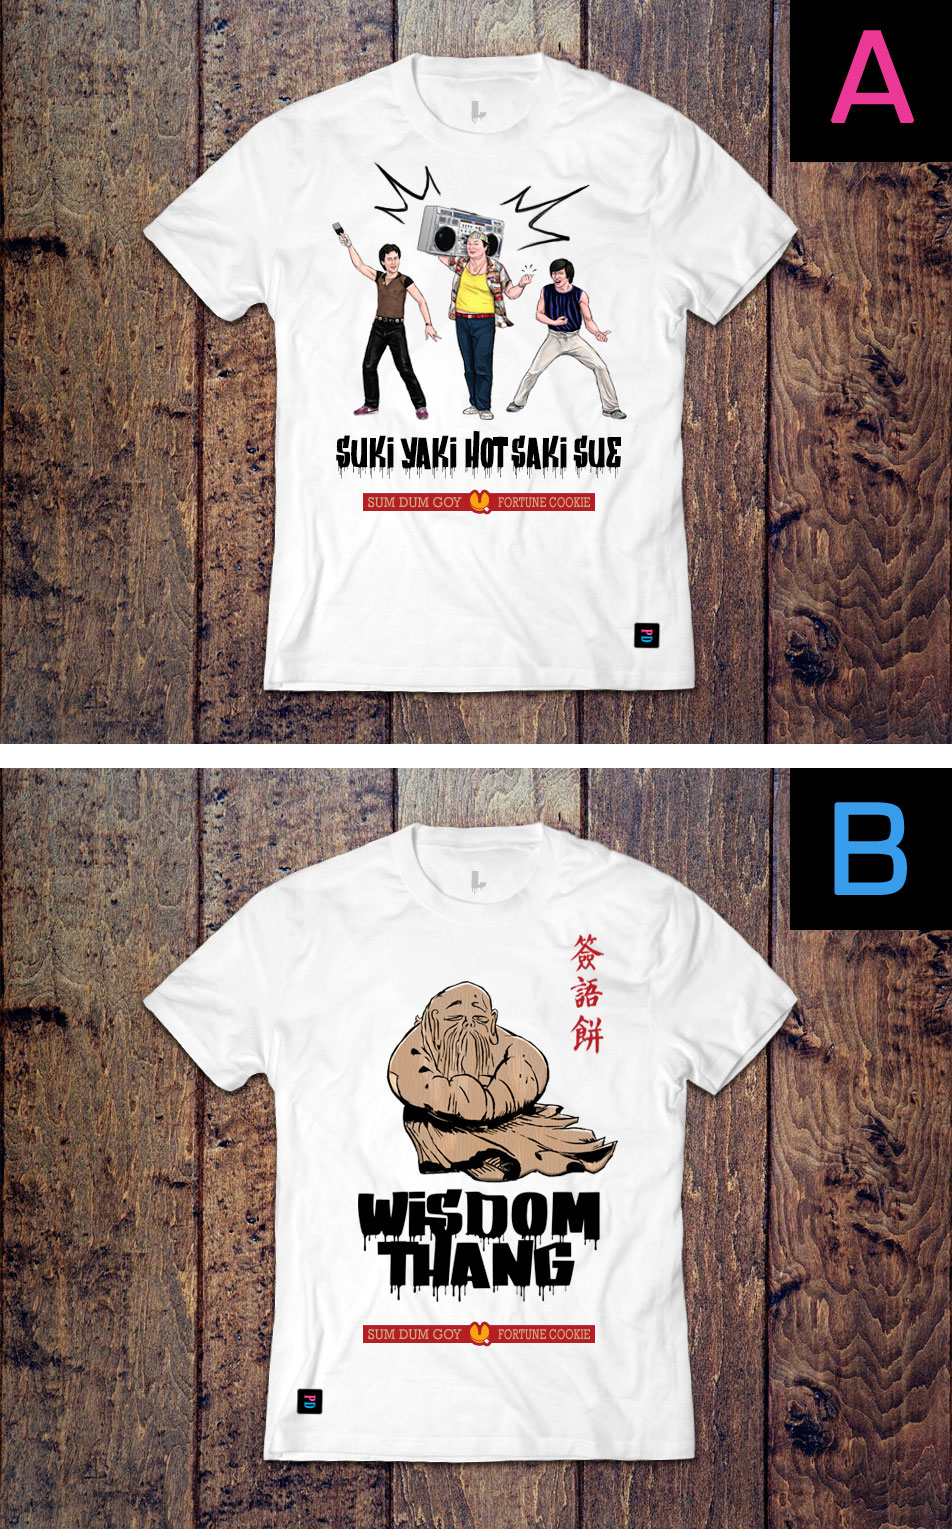 Buy Fortune Cookie PD T-Shirt designs by Marten Go aka MGO